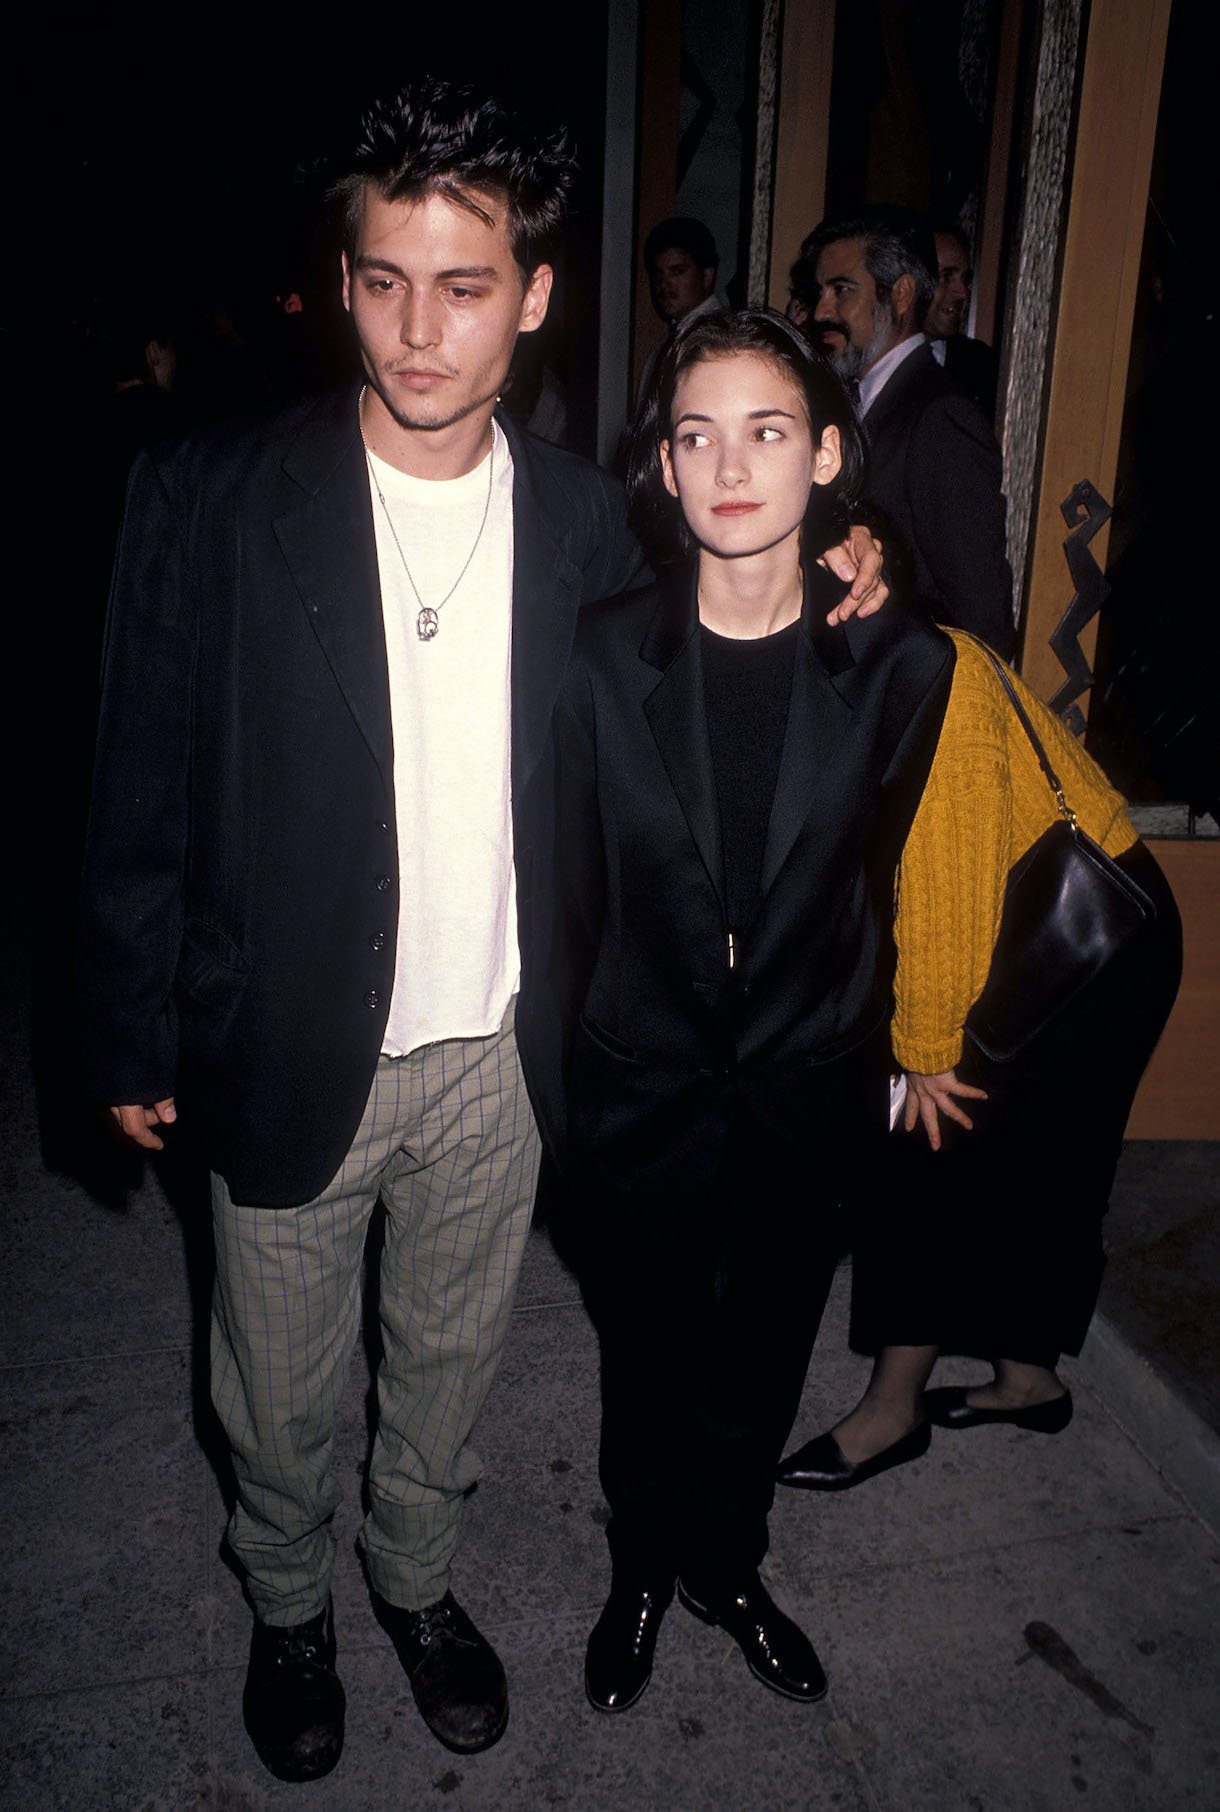 Johnny Depp and actress Winona Ryder in 1990